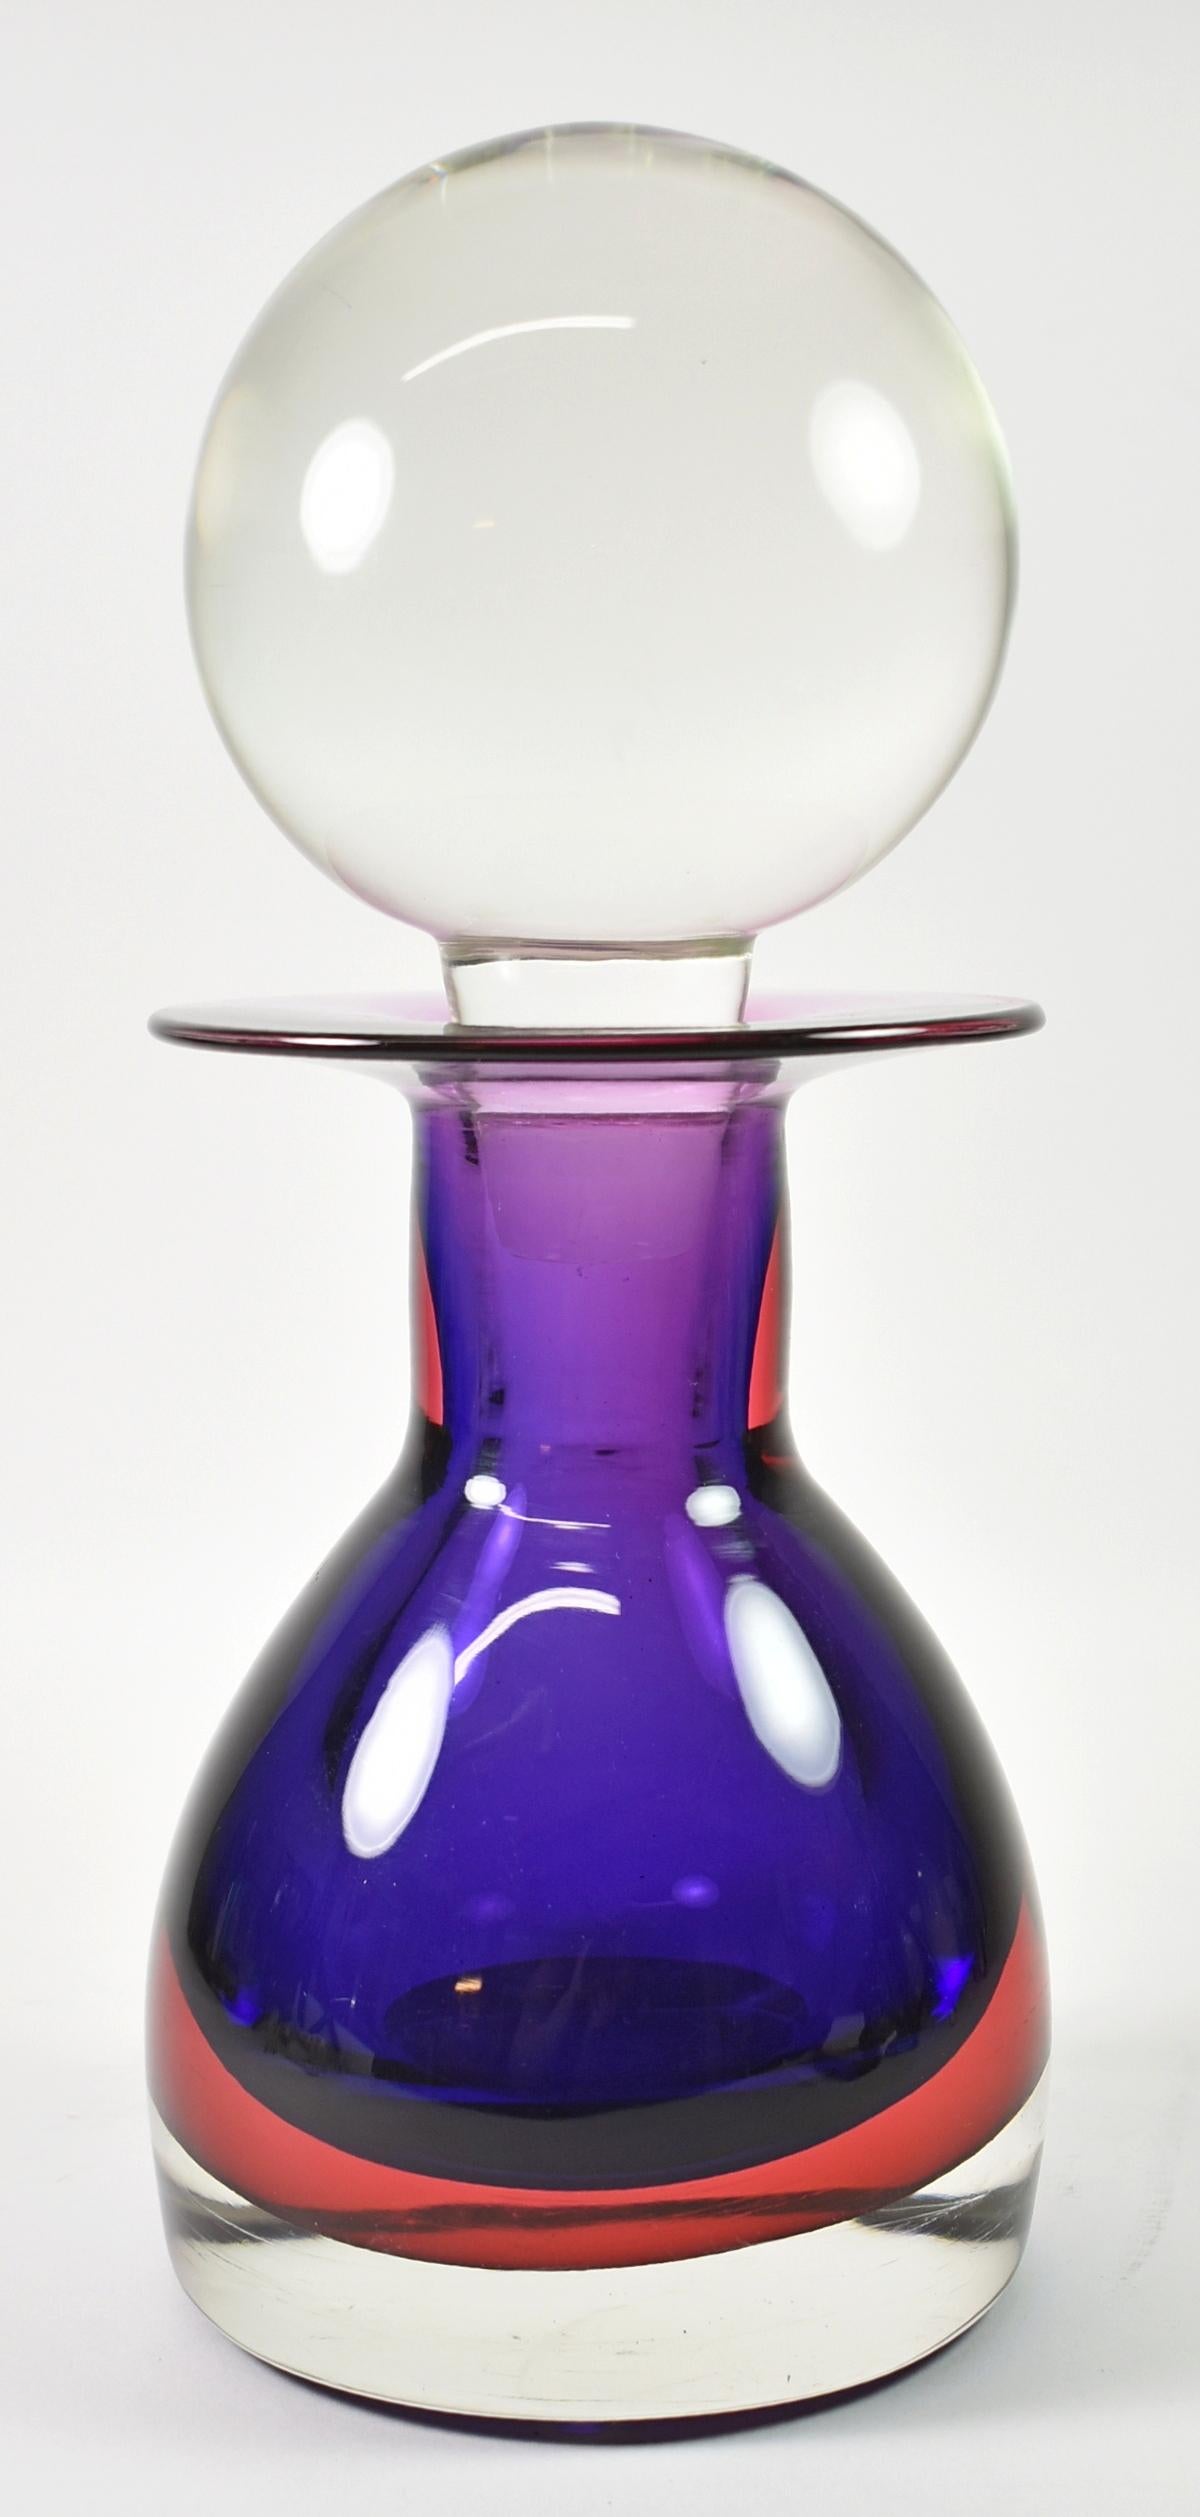 Large Seguso Vetri D'arte Murano Sommerso Decanter Vase, designed by Pinzoni, signed by Albarelli. Designed by Pinzoni Model #13986. Circa 1998. Signed by Albarelli. Sommerso technique using red and purple glass. Made in Italy. Stopper is 7.75